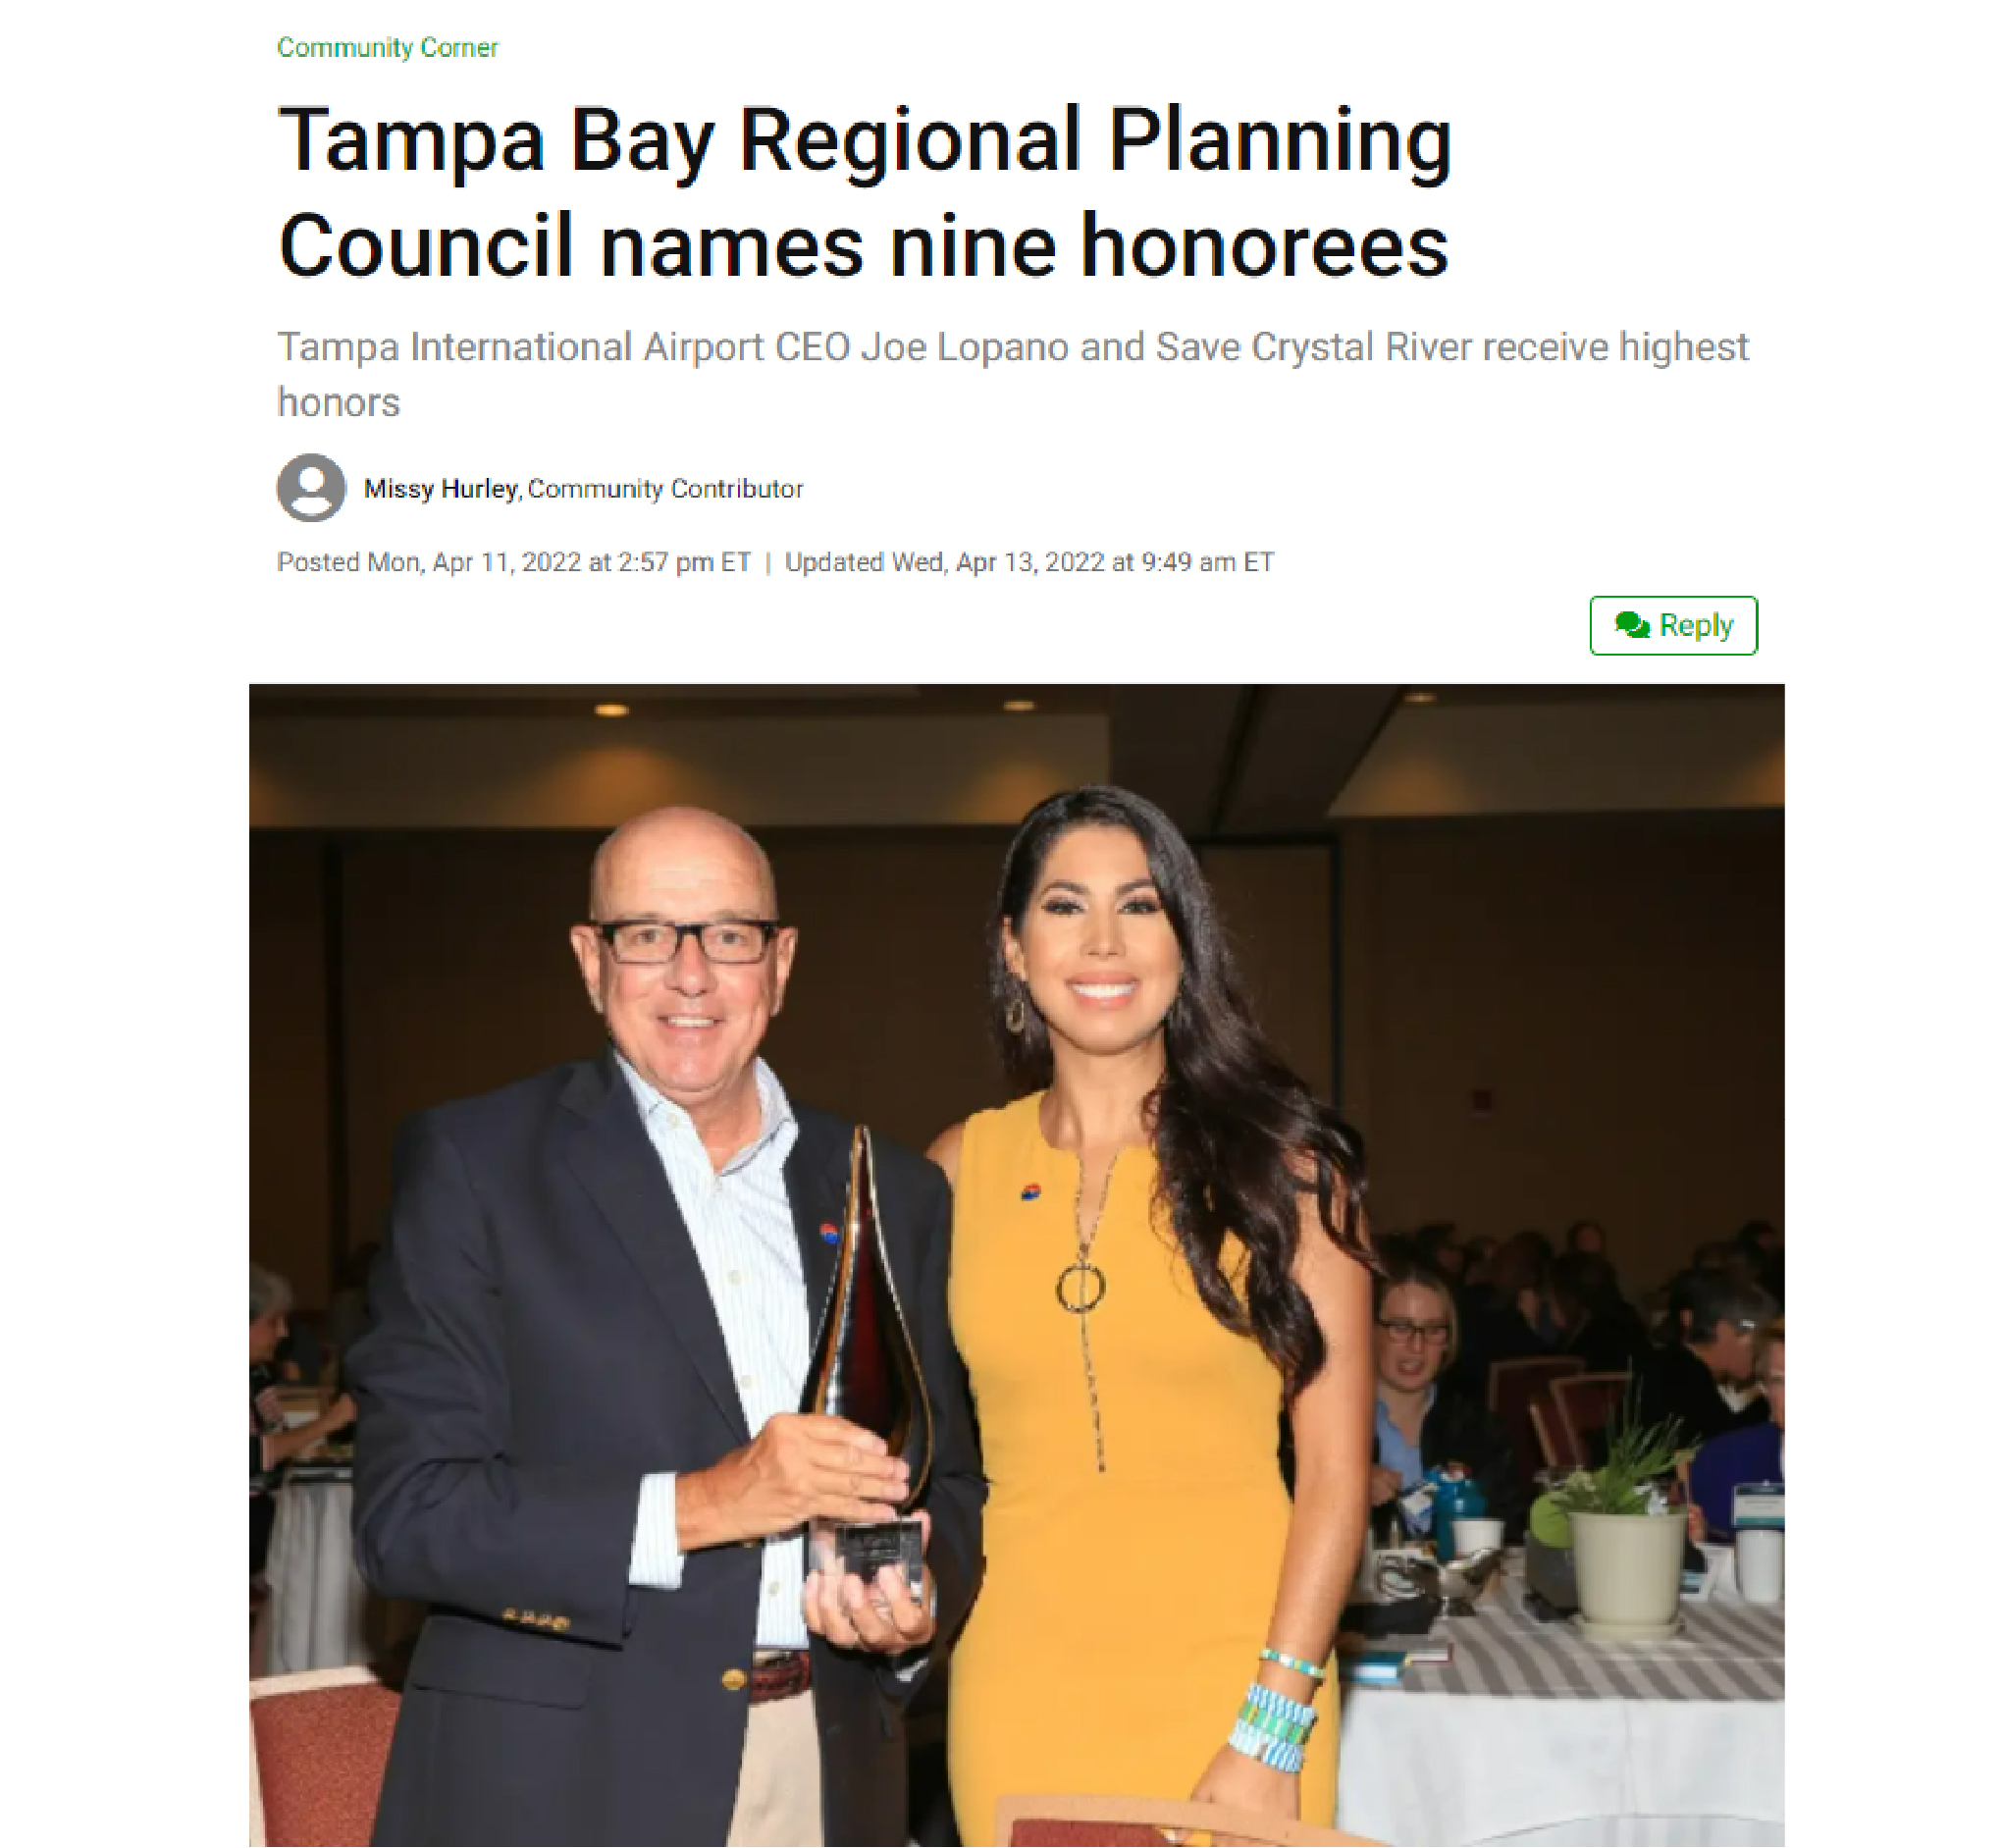 Tampa Bay Regional Planning Council names nine honorees